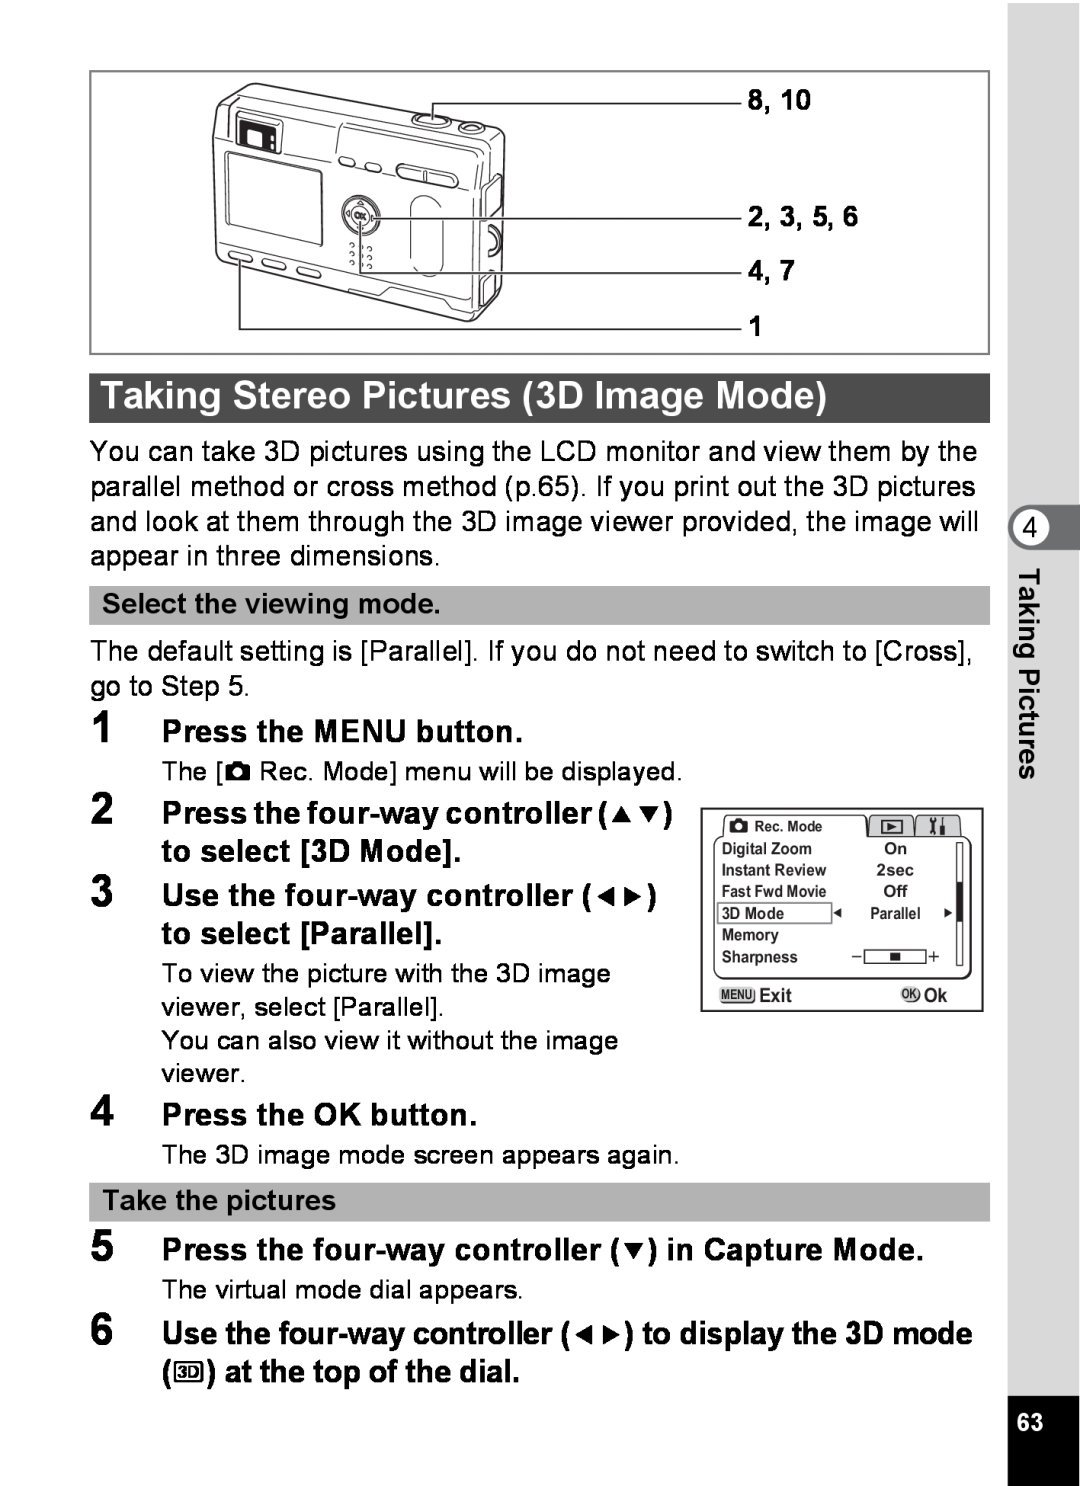 Pentax S4 Taking Stereo Pictures 3D Image Mode, Press the MENU button, Press the four-way controller 23 to select 3D Mode 